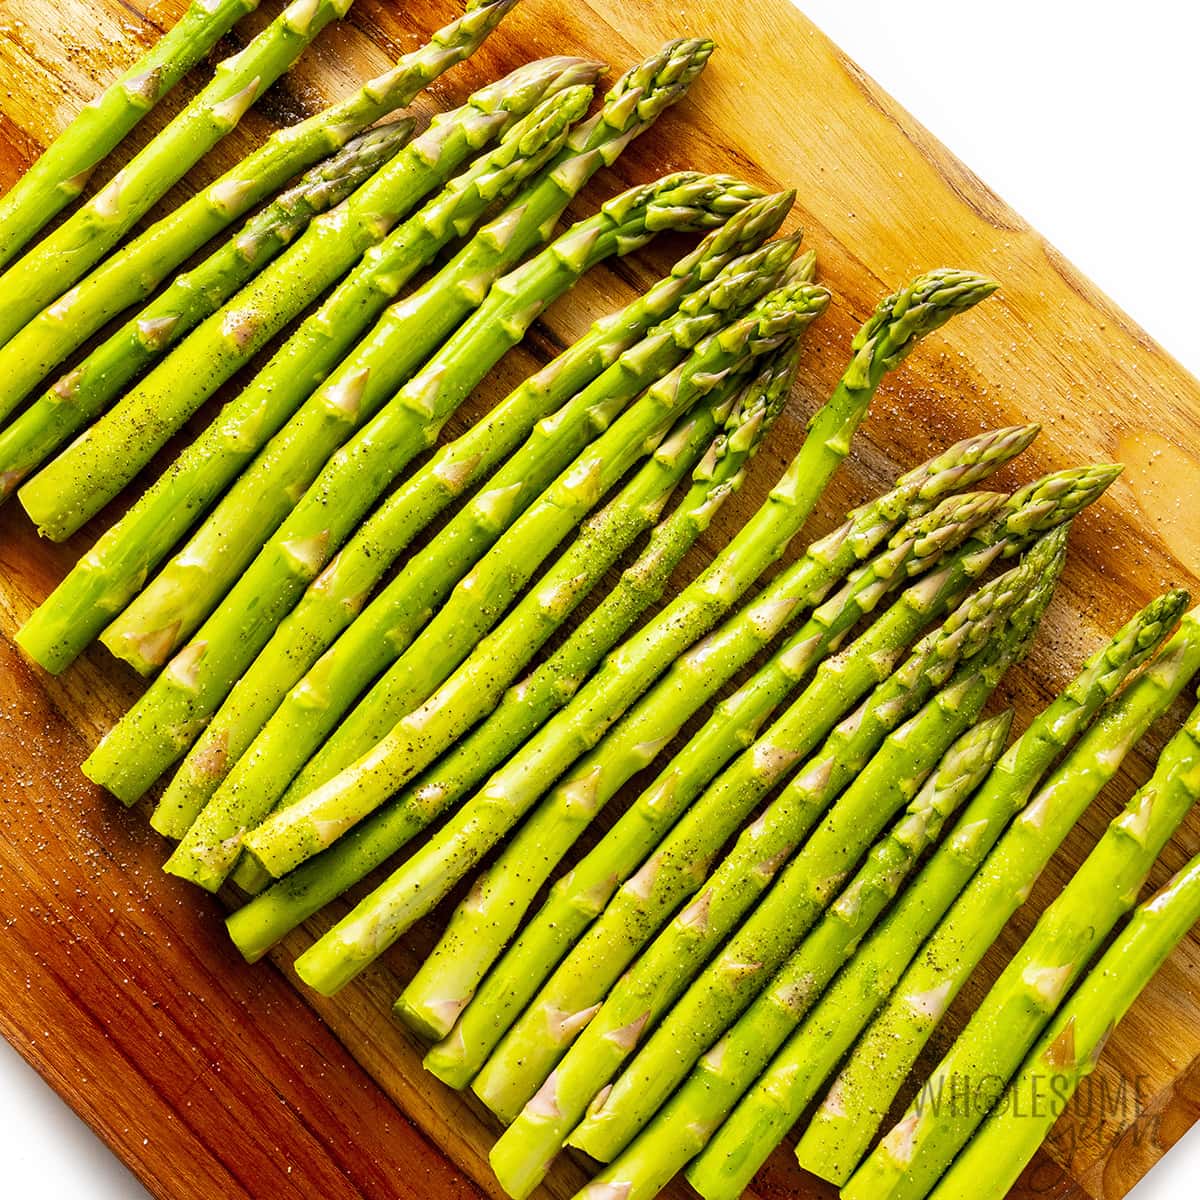 Asparagus prepped and seasoned on a cutting board.